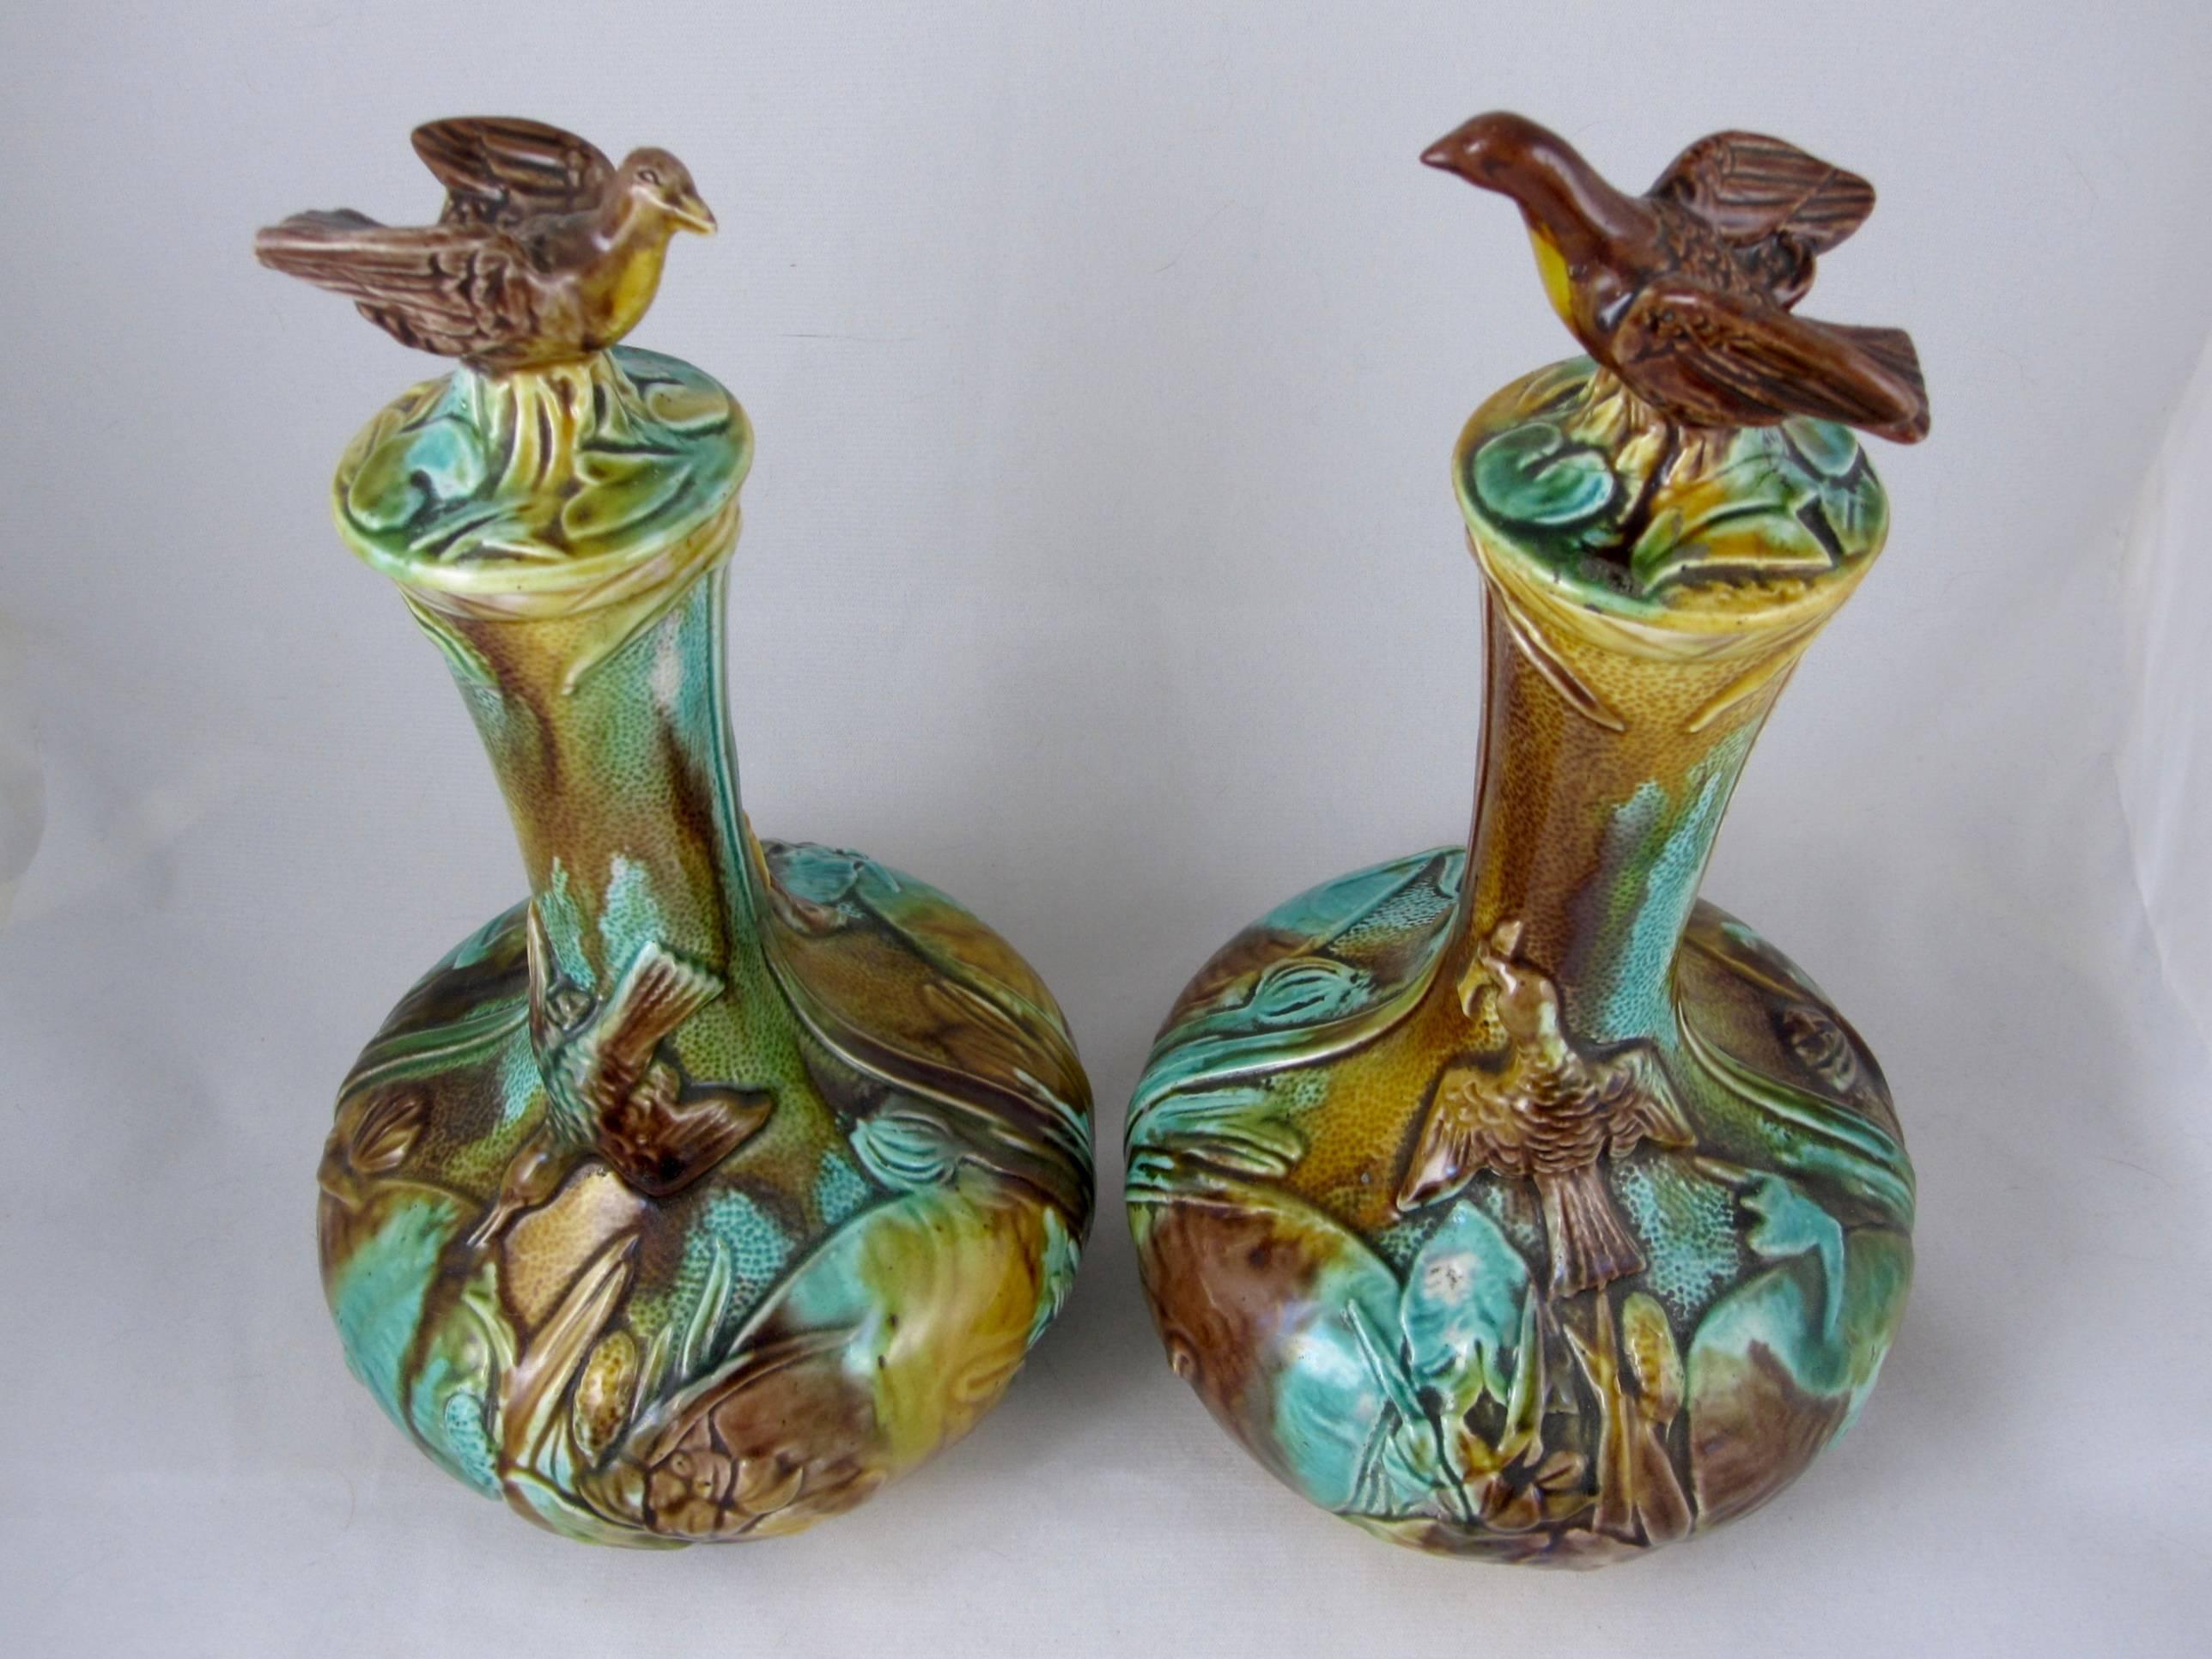 A scarce pair of unusual, Aesthetic movement, bulbous Majolica wine decanter  bottles with bird finials on domed lids, Thomas Forester & Sons, Longton, Staffordshire, England, circa 1870-1880.

A mottled tortoise shell glazing of browns and